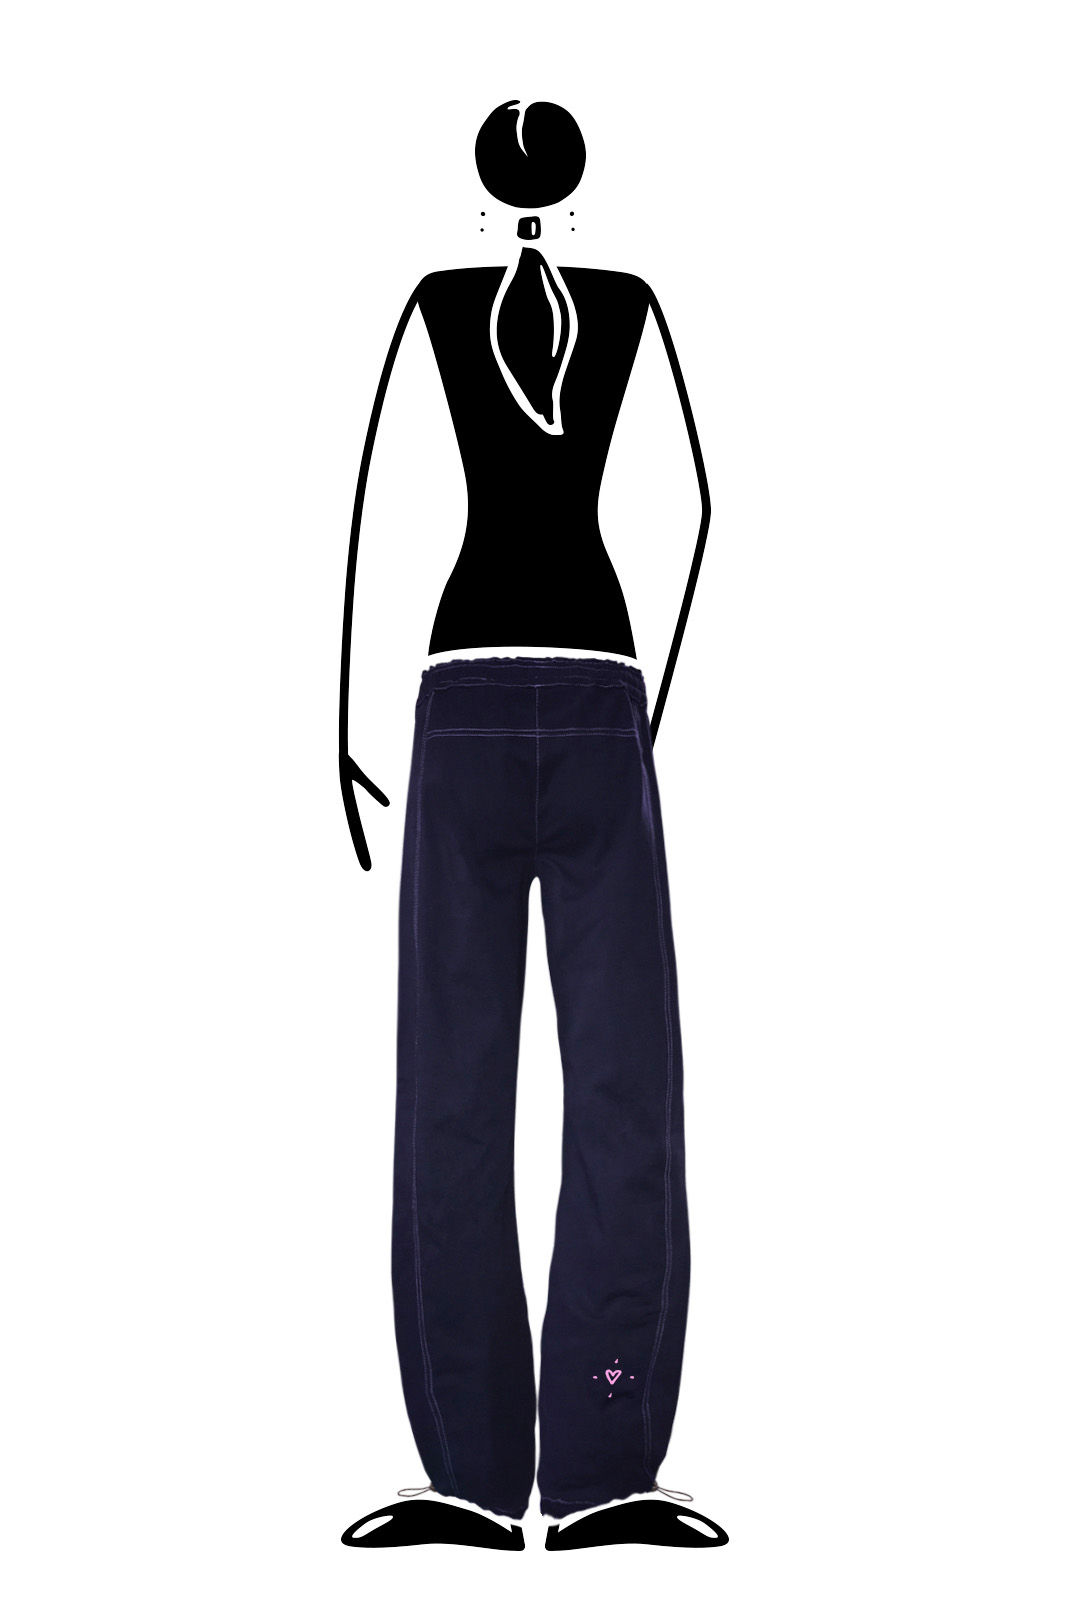 Women's climbing Trousers KATY ⋆ MONVIC ⋆ Made in Italy with ❤